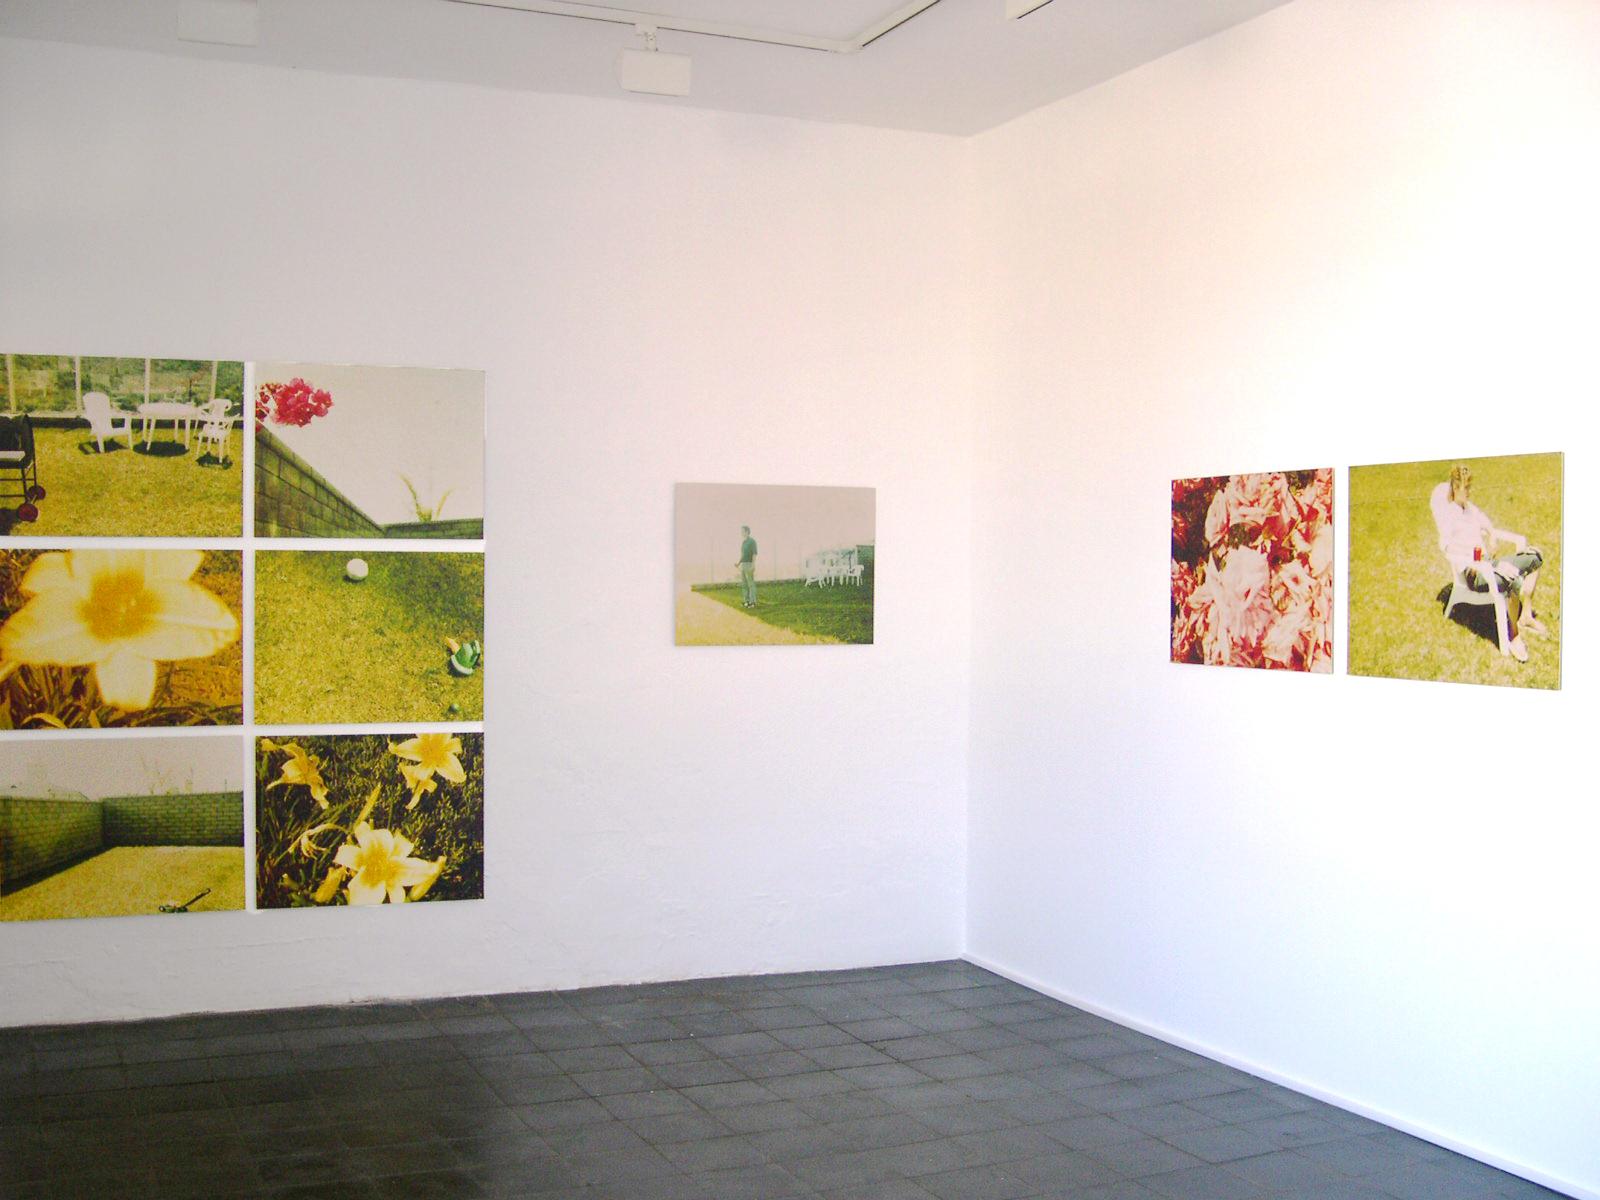 Rosegarden #01 (Suburbia), diptych - 2004 

Edition 3/5,
60x80cm each, 60x170cm installed. 
2 Analog C-Prints, hand-printed by the artist on Fuji Crystal Archive Paper, matte surface, based on the 2 original Polaroids. Mounted on Aluminum with matte